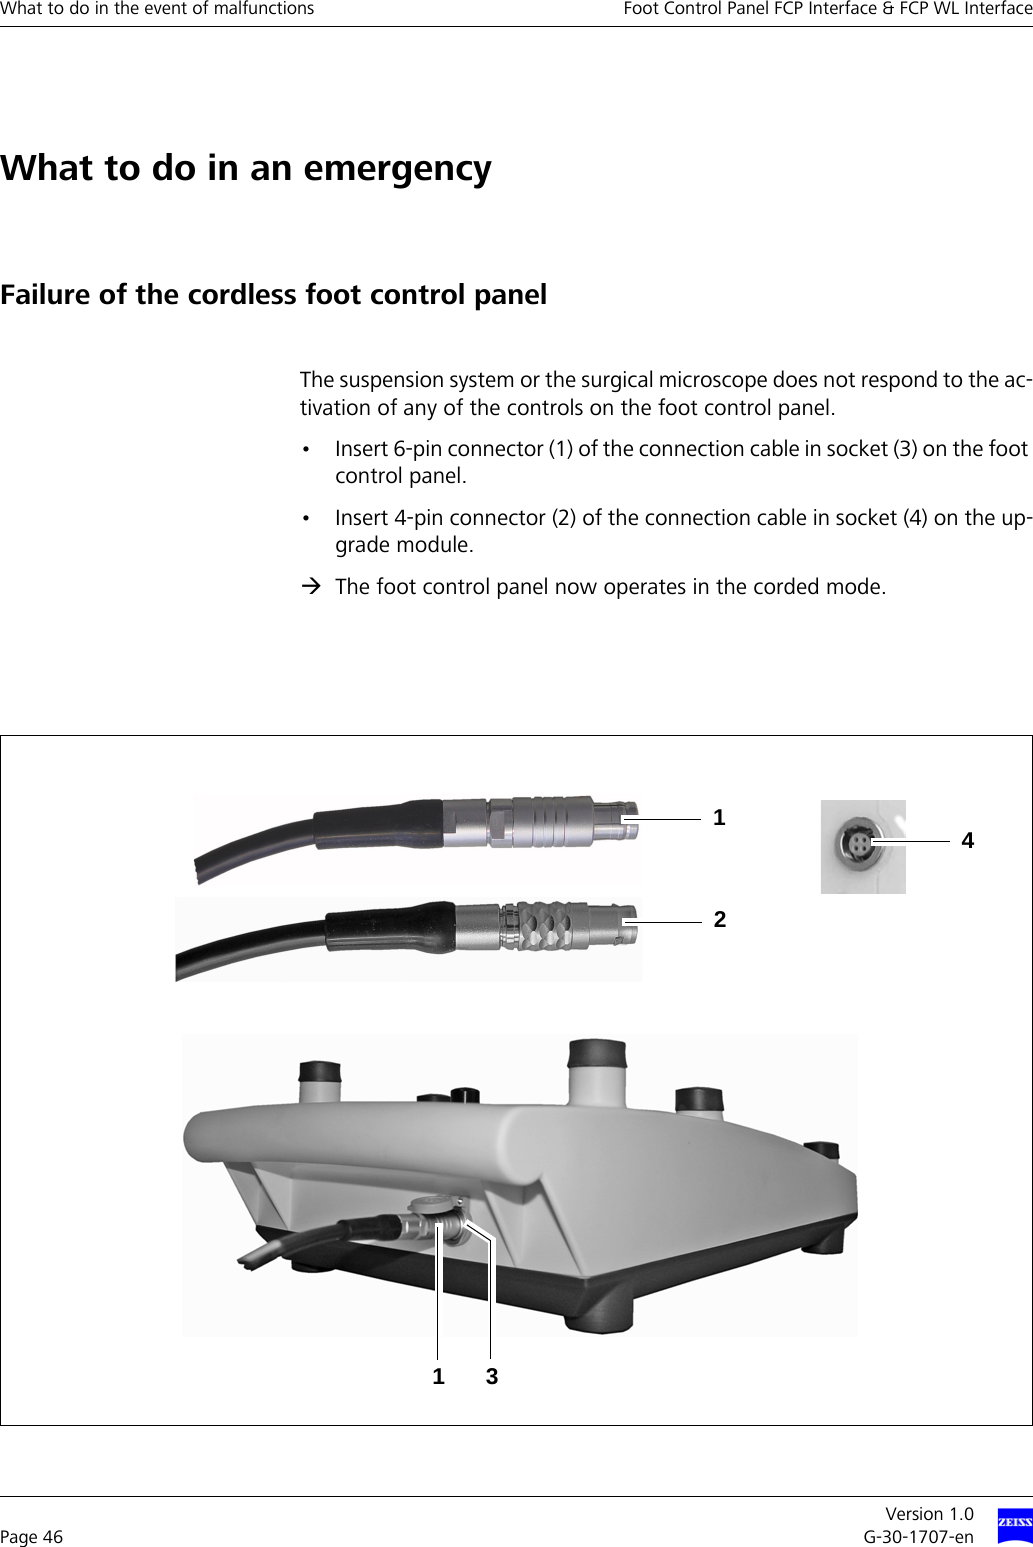 What to do in the event of malfunctions Foot Control Panel FCP Interface &amp; FCP WL InterfaceVersion 1.0Page 46 G-30-1707-enWhat to do in an emergencyFailure of the cordless foot control panelThe suspension system or the surgical microscope does not respond to the ac-tivation of any of the controls on the foot control panel. • Insert 6-pin connector (1) of the connection cable in socket (3) on the foot control panel.• Insert 4-pin connector (2) of the connection cable in socket (4) on the up-grade module. ÆThe foot control panel now operates in the corded mode.13214